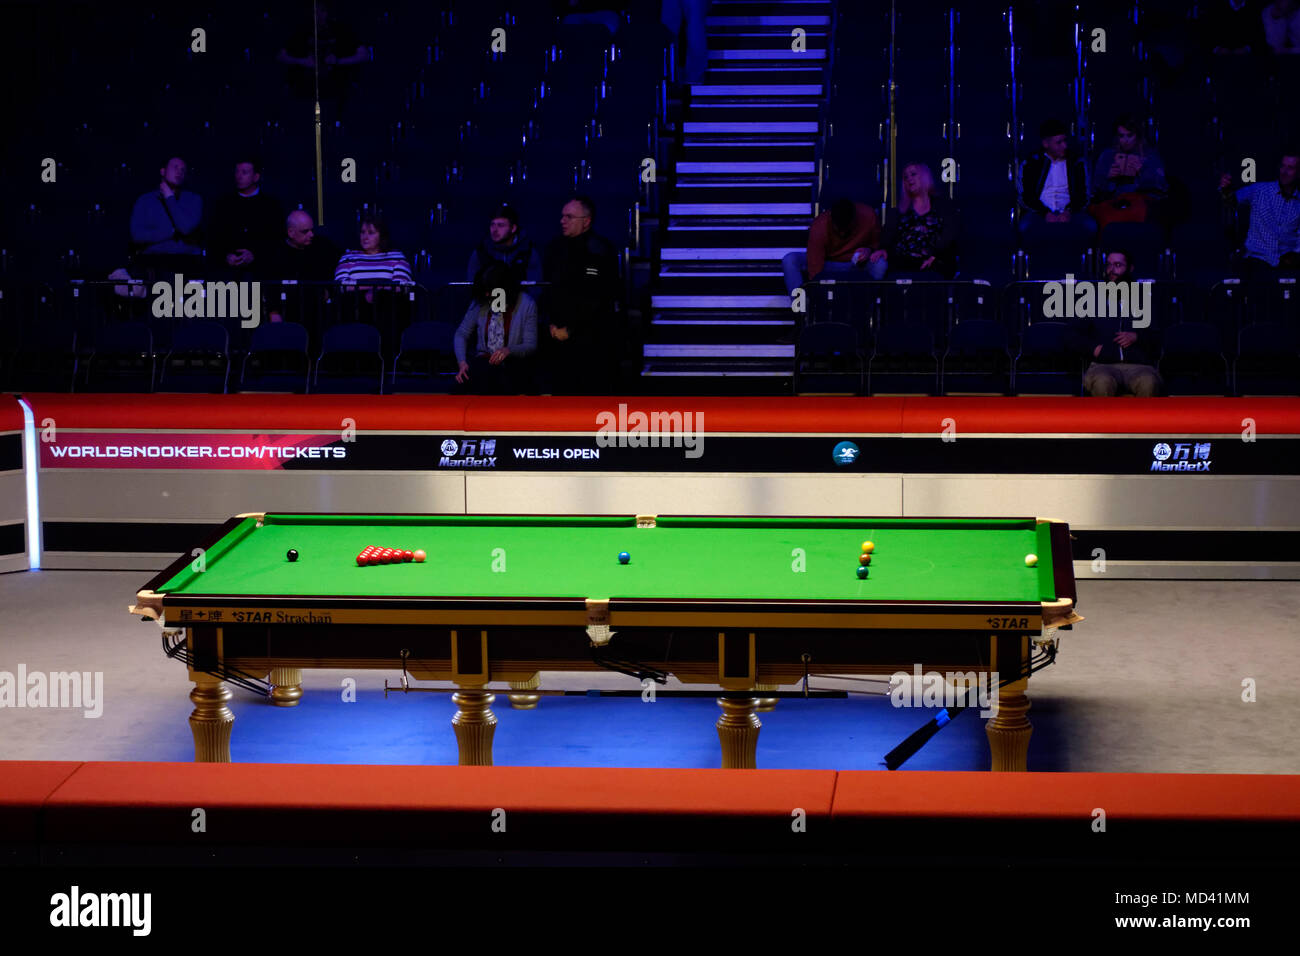 Snooker table at Welsh Open Snooker tournament, 2018. Stock Photo